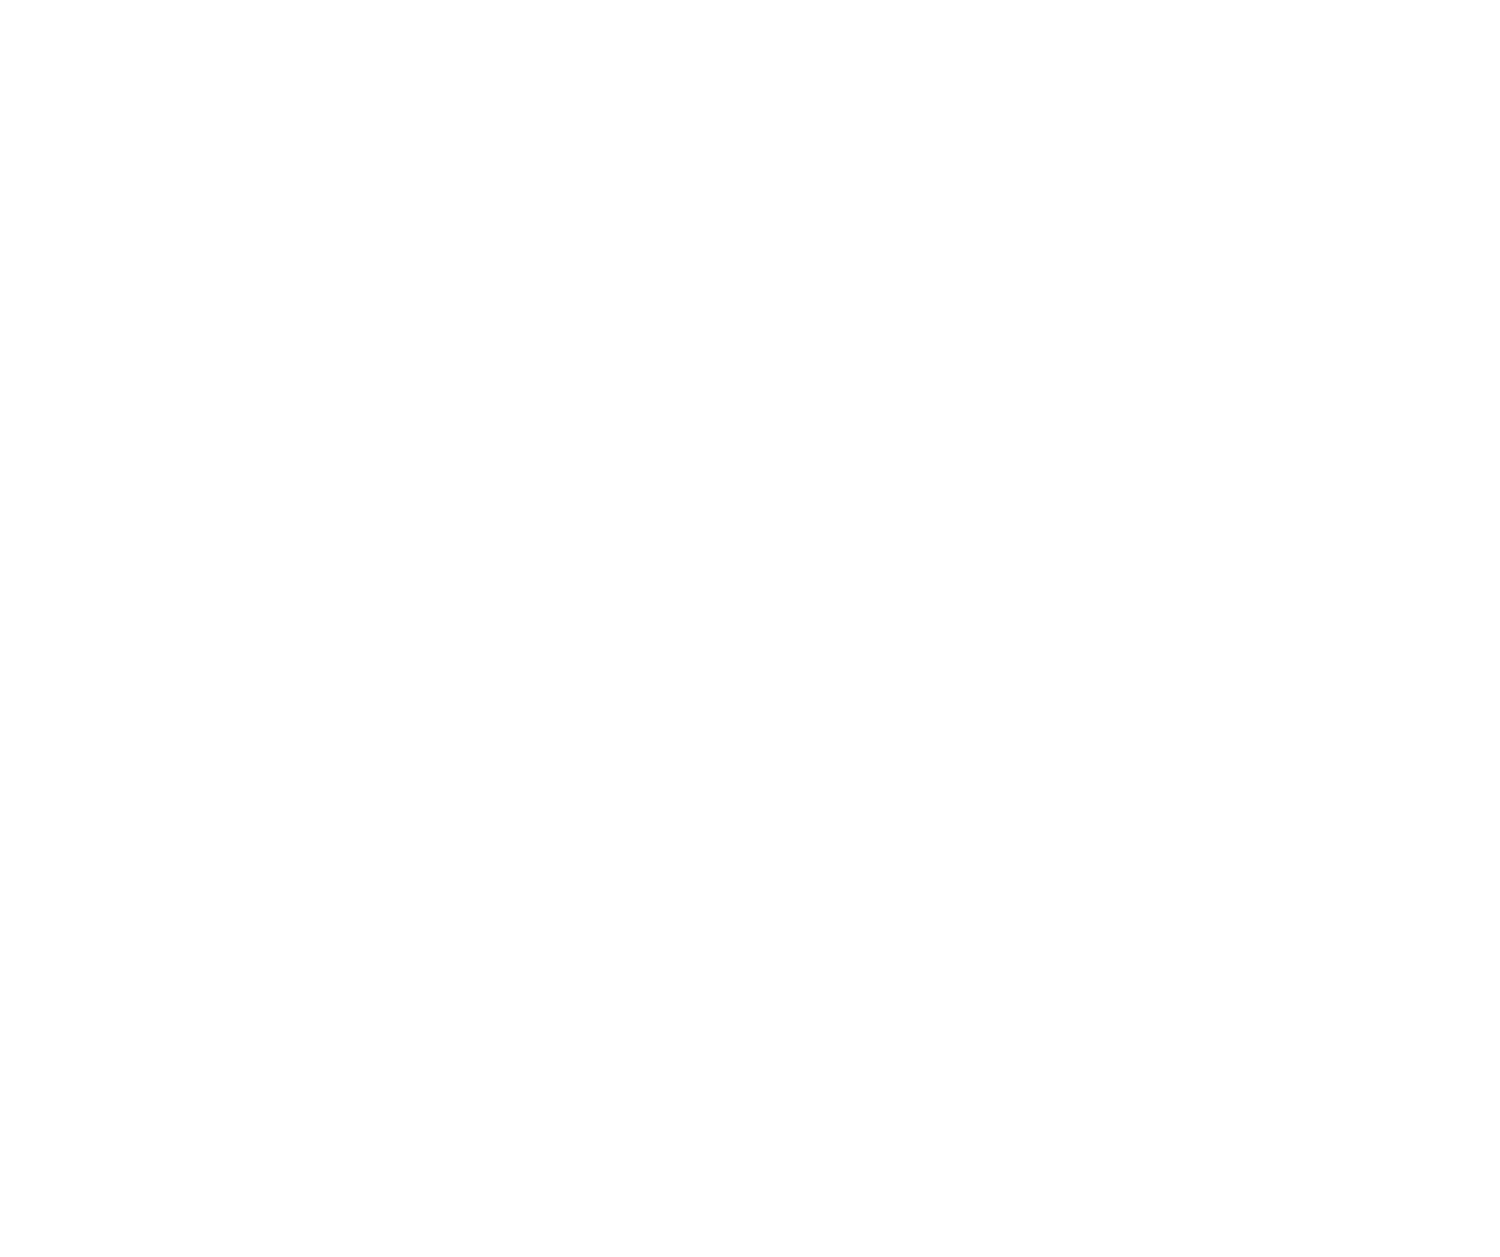 Odeens Catering Company